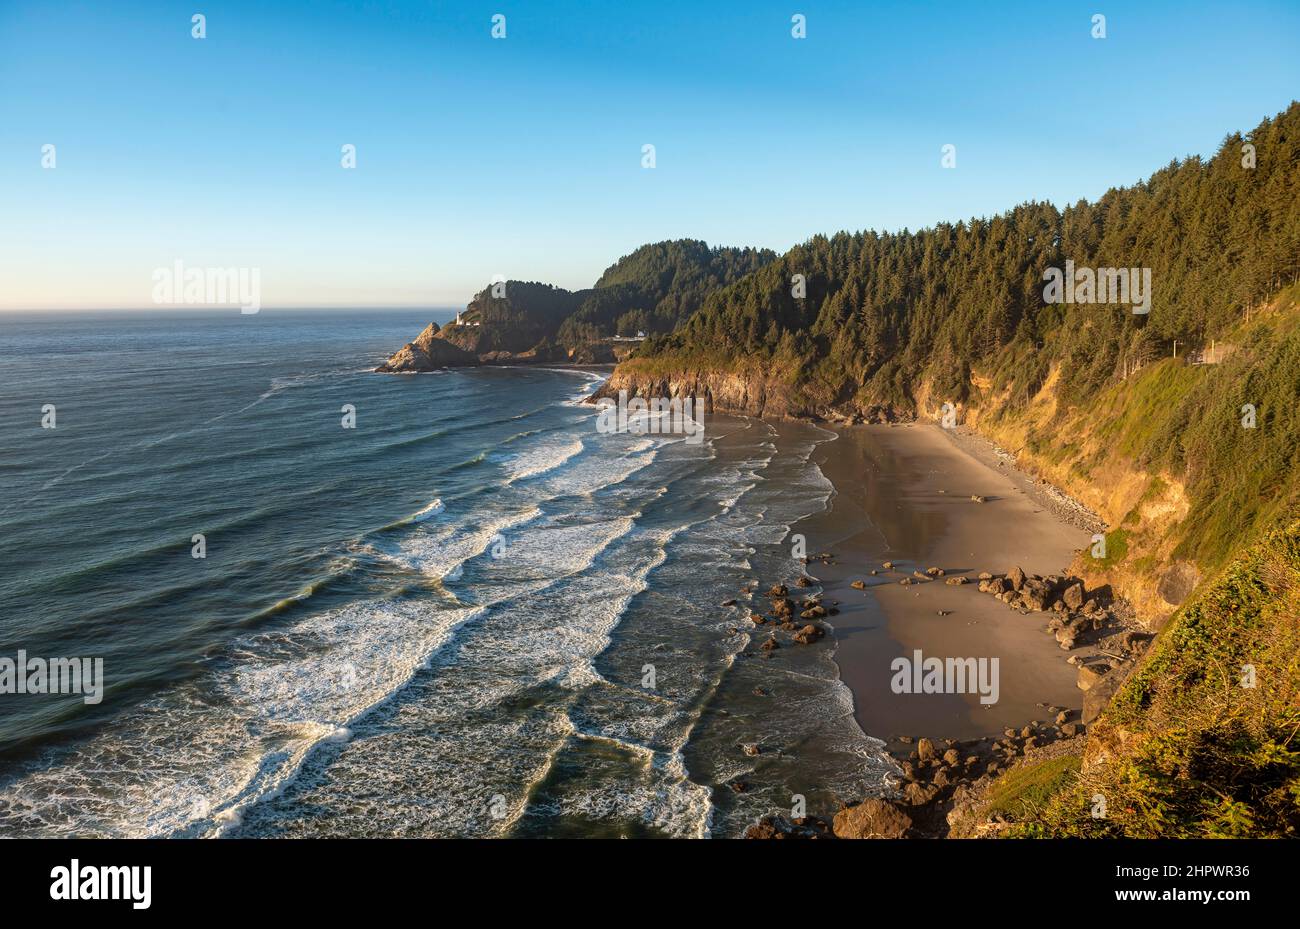 Sandy beach Sealion Beach with Devils Elbow, in the back rocky coast with Heceta Head lighthouse, Oregon, USA Stock Photo